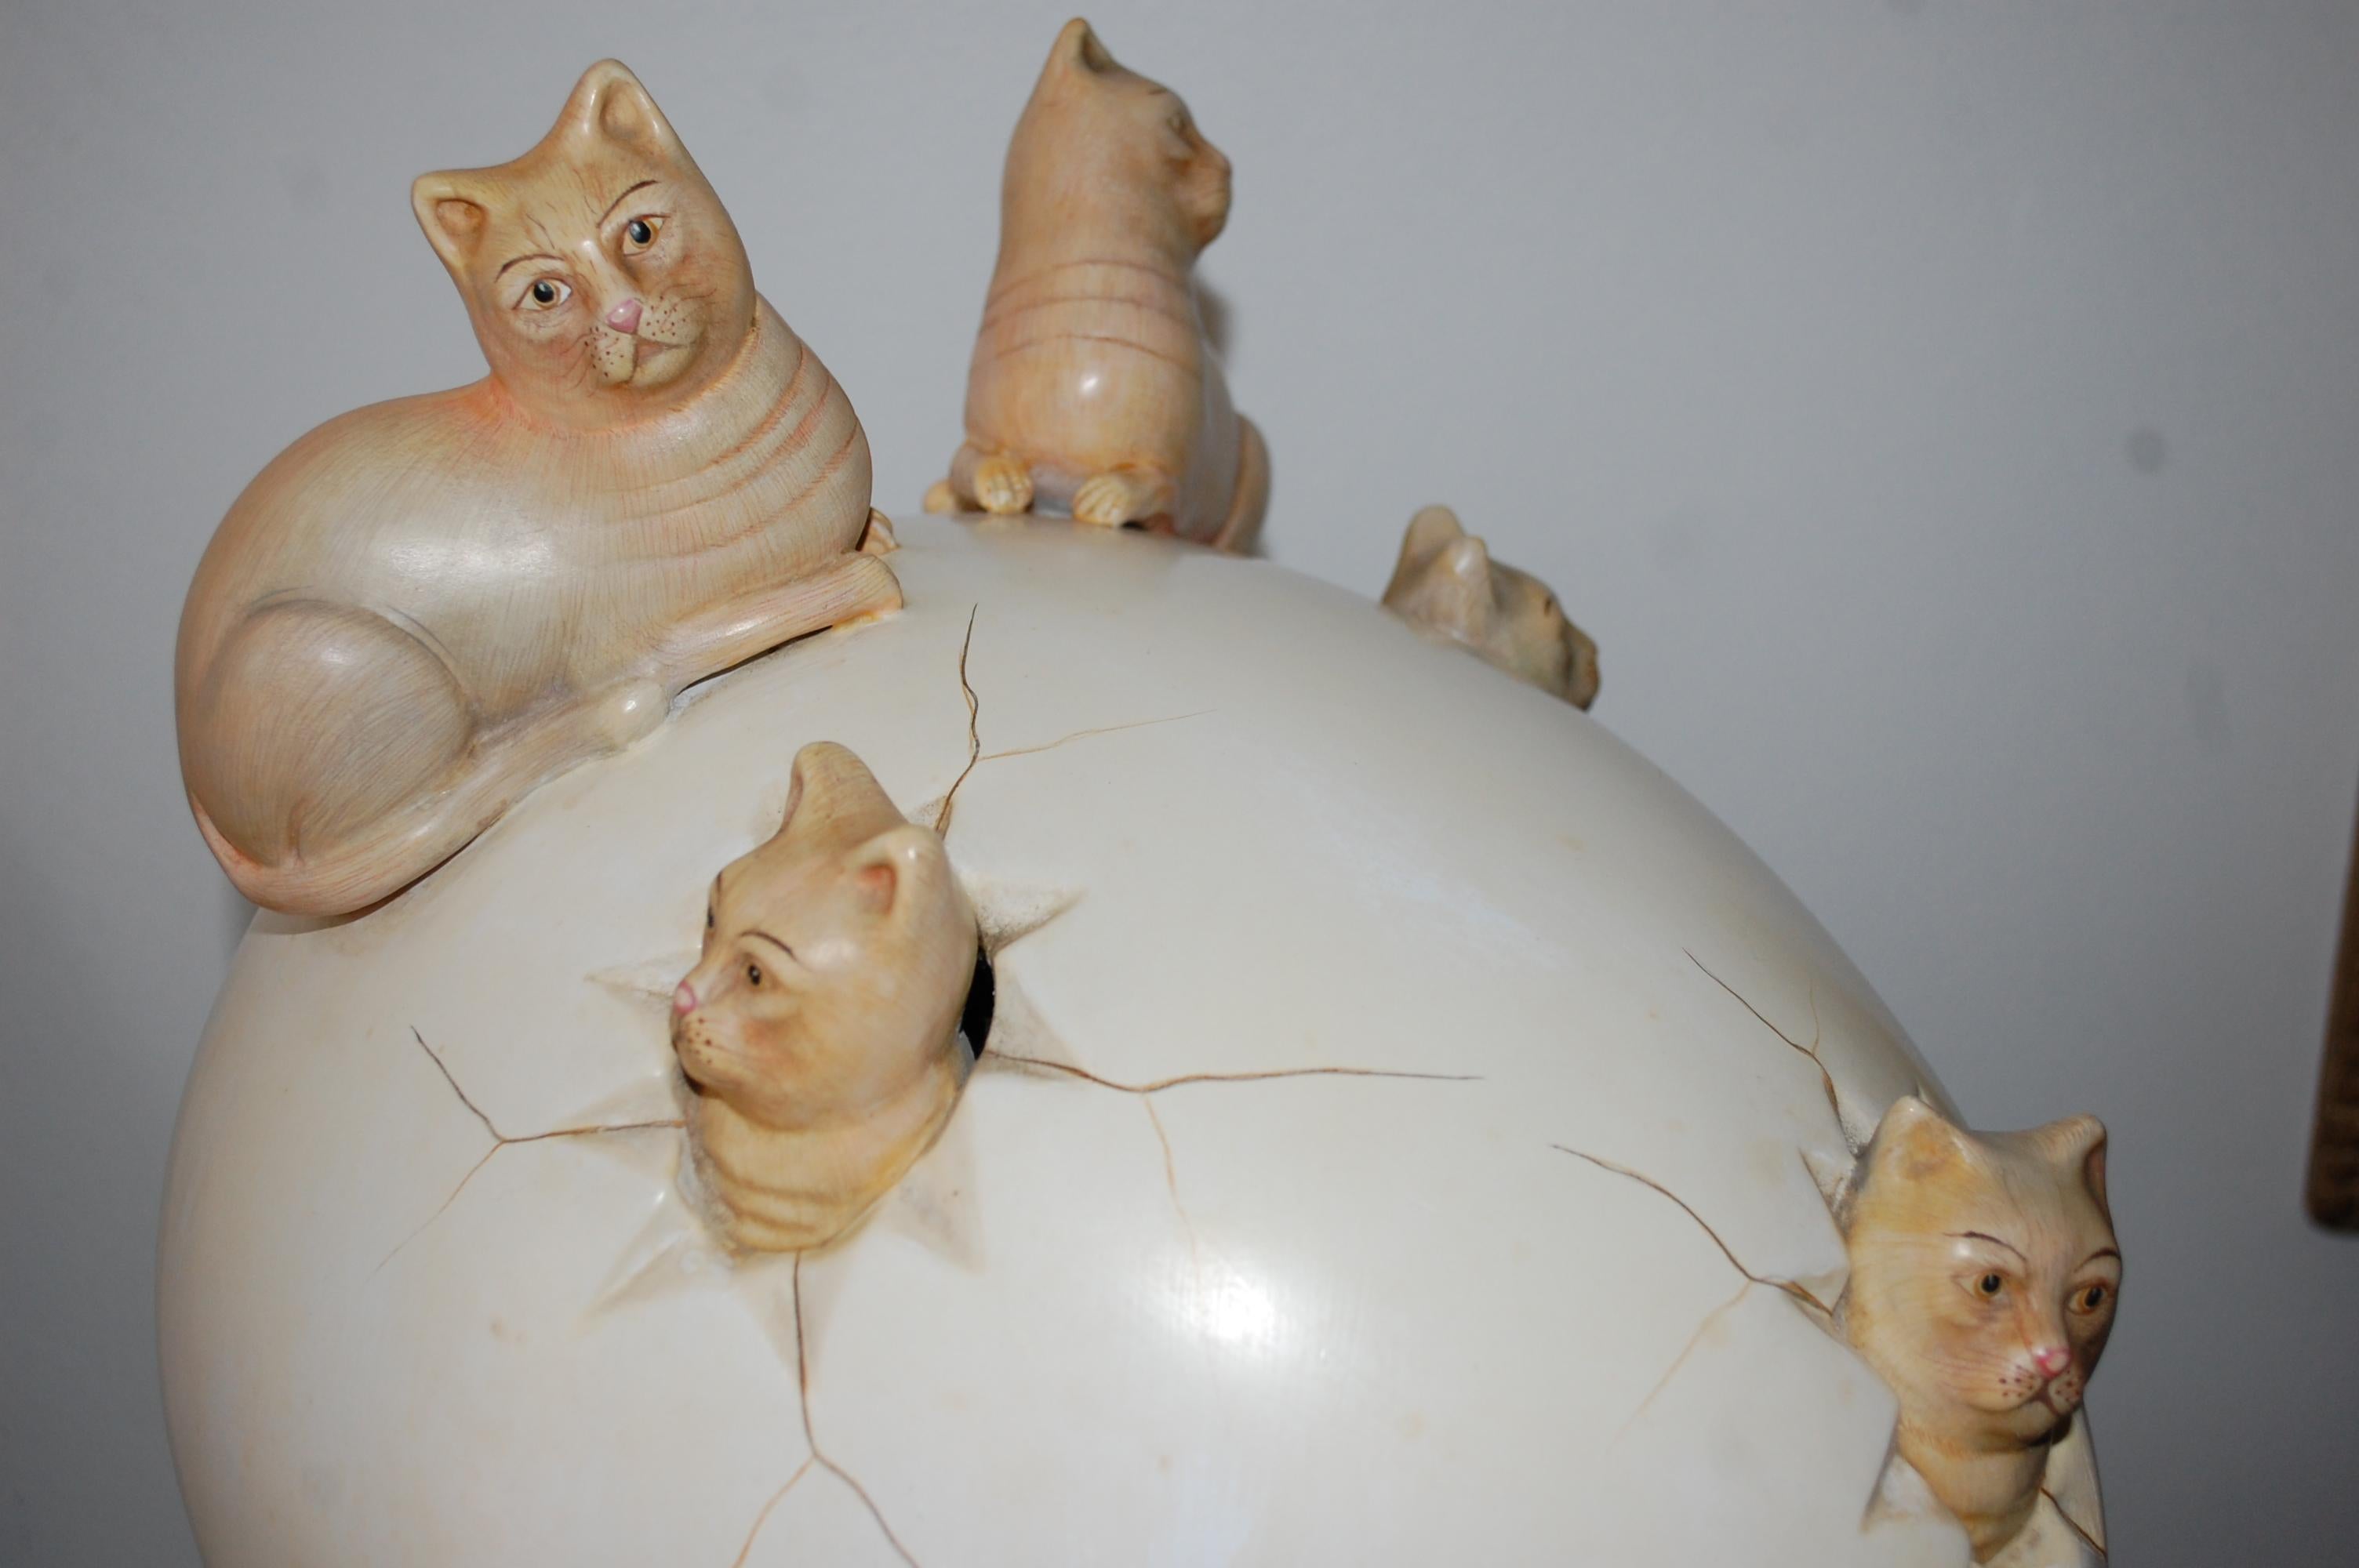  Cats Hatching From Egg Ceramic - Beige Figurative Sculpture by Sergio Bustamante